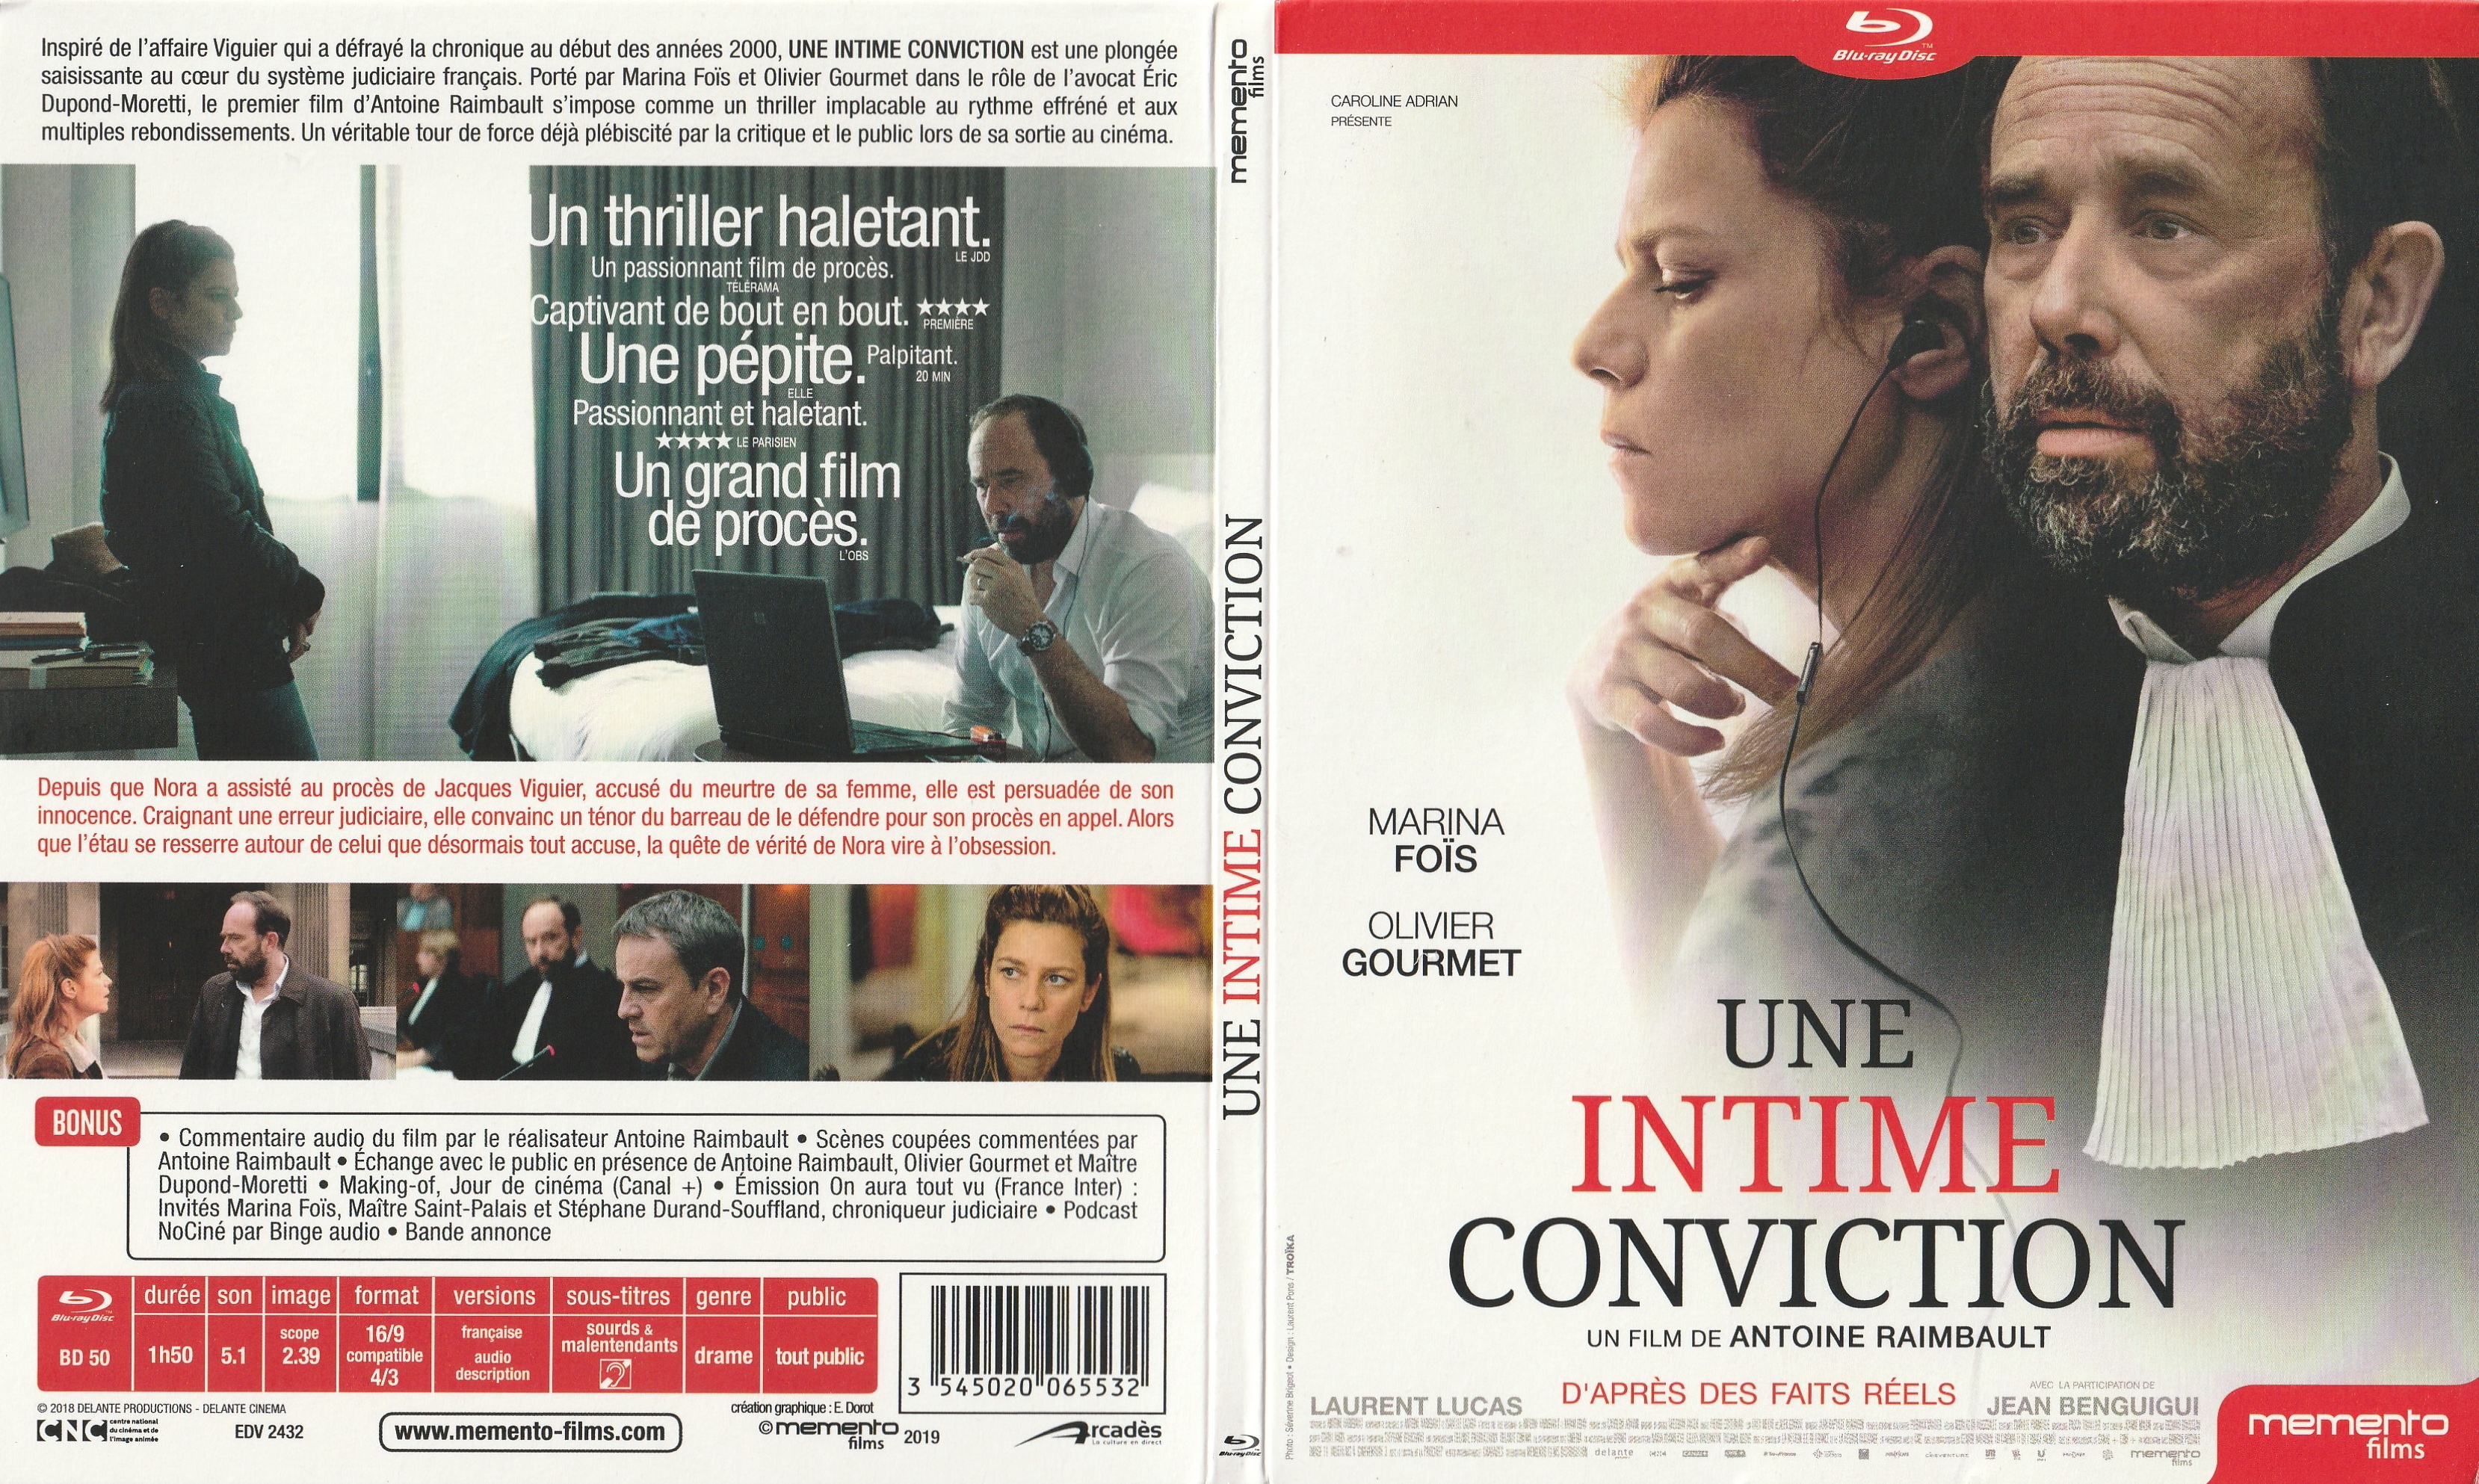 Jaquette DVD Une intime conviction (BLU-RAY)